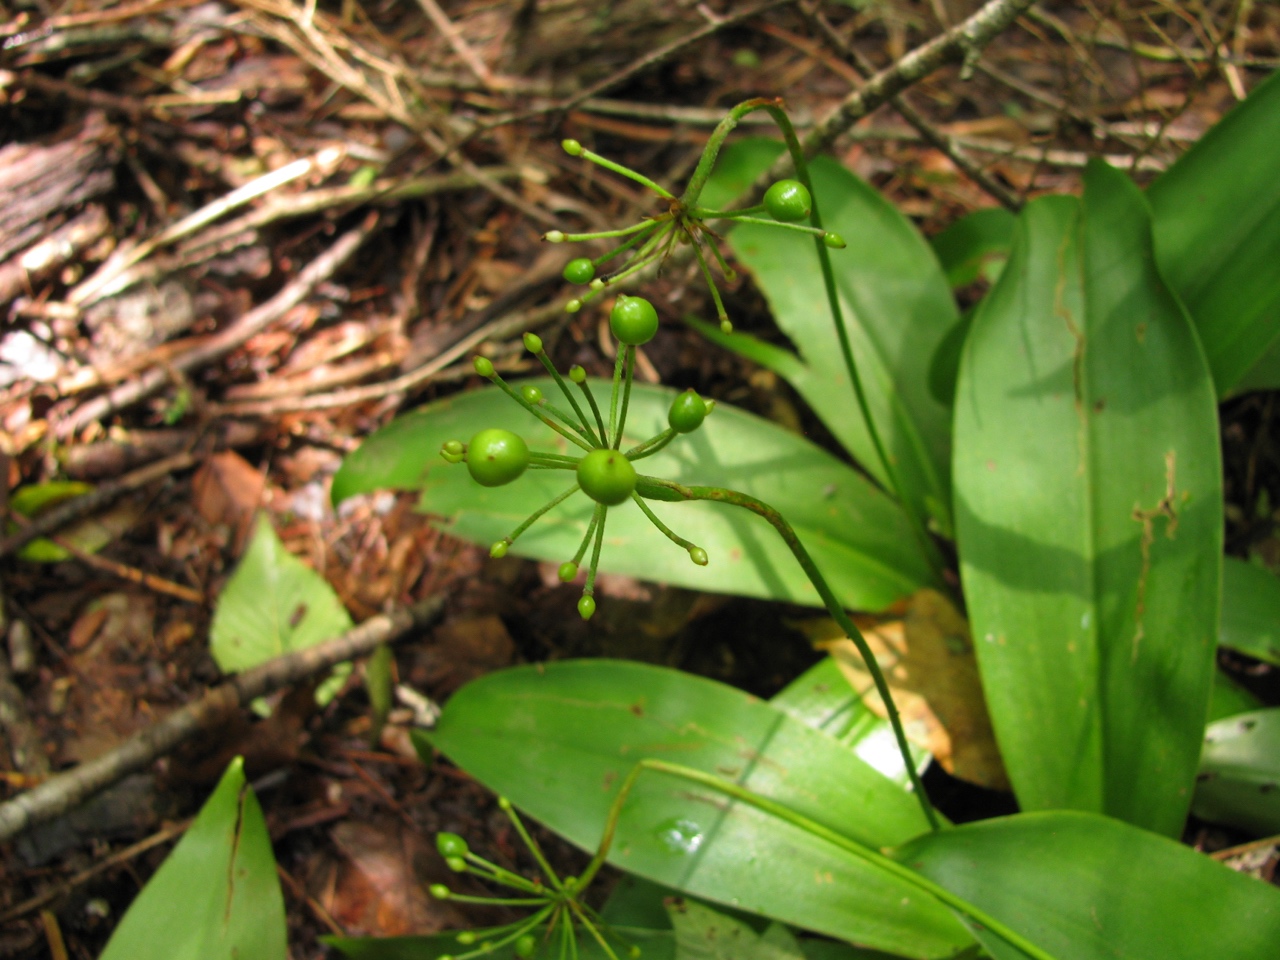 The Scientific Name is Clintonia umbellulata. You will likely hear them called Speckled Wood Lily. This picture shows the Developing fruit.  C. umbellulata tends to have more flowers (10-25) compared to C. borealis (3-8). of Clintonia umbellulata